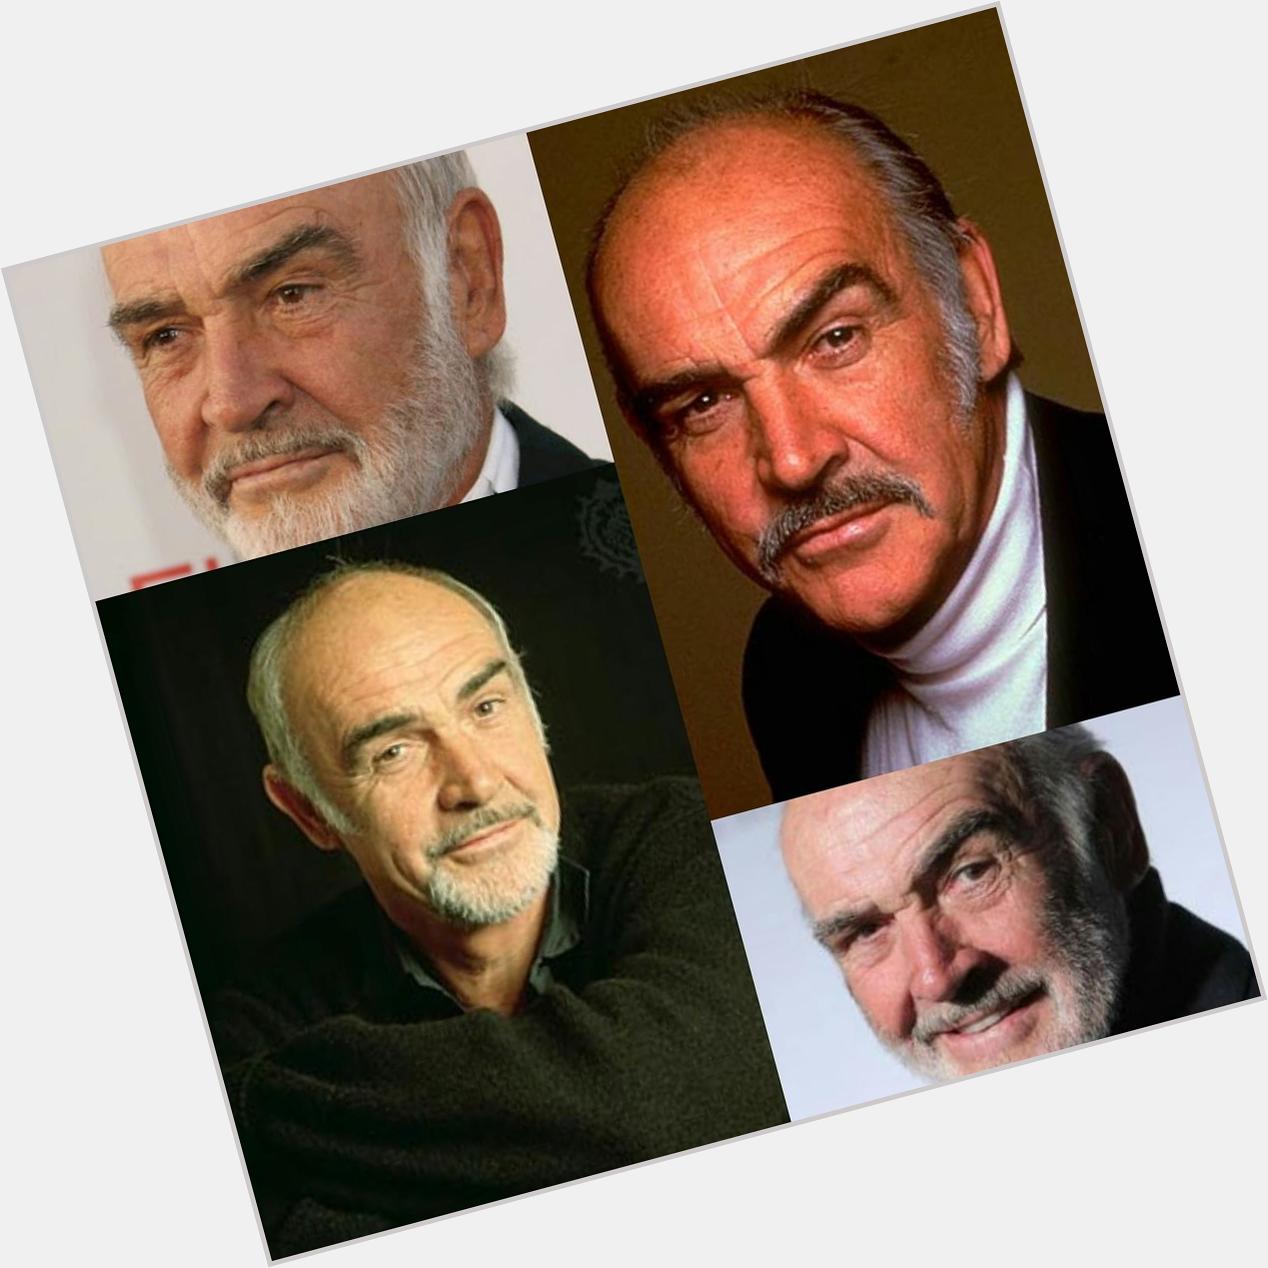 Happy Birthday, Sir Sean Connery! From your bonnie lads n lasses at Hysteria xx 